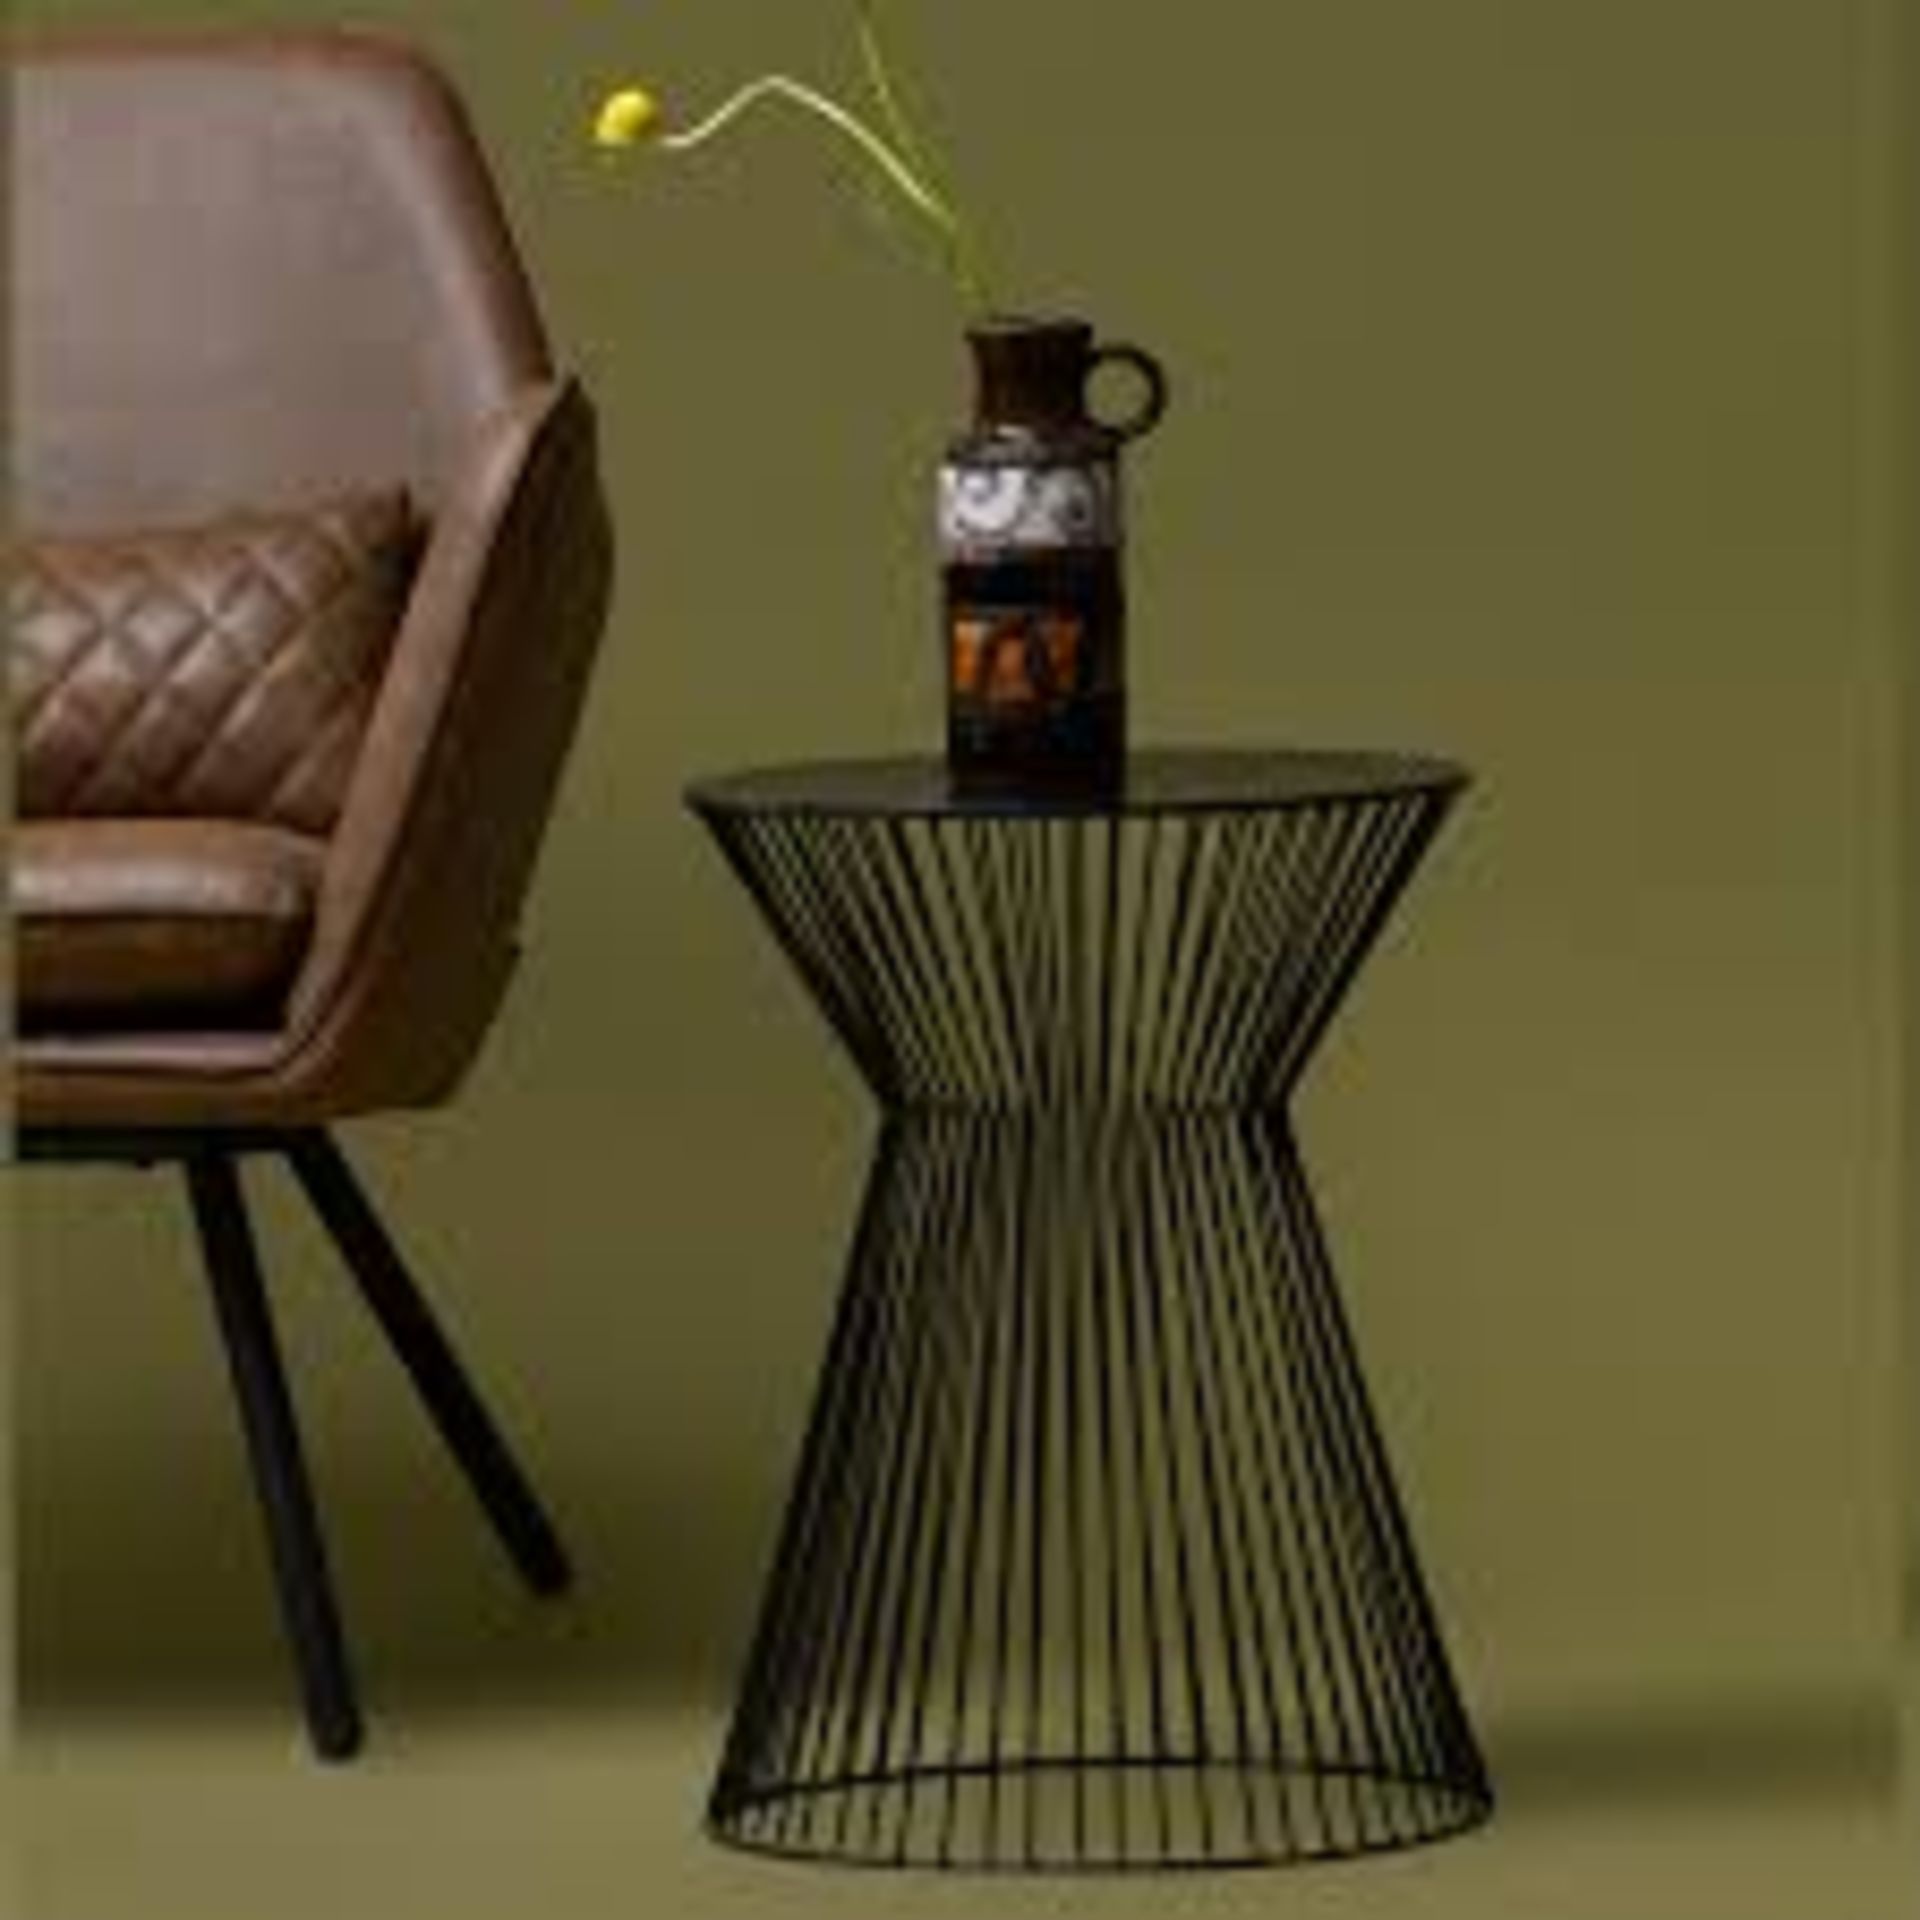 1 x 'Suus' Contemporary Diabalo Style Openwork Metal SIDE Table In Black - Dimensions: 35 × 35 × H46 - Image 3 of 3